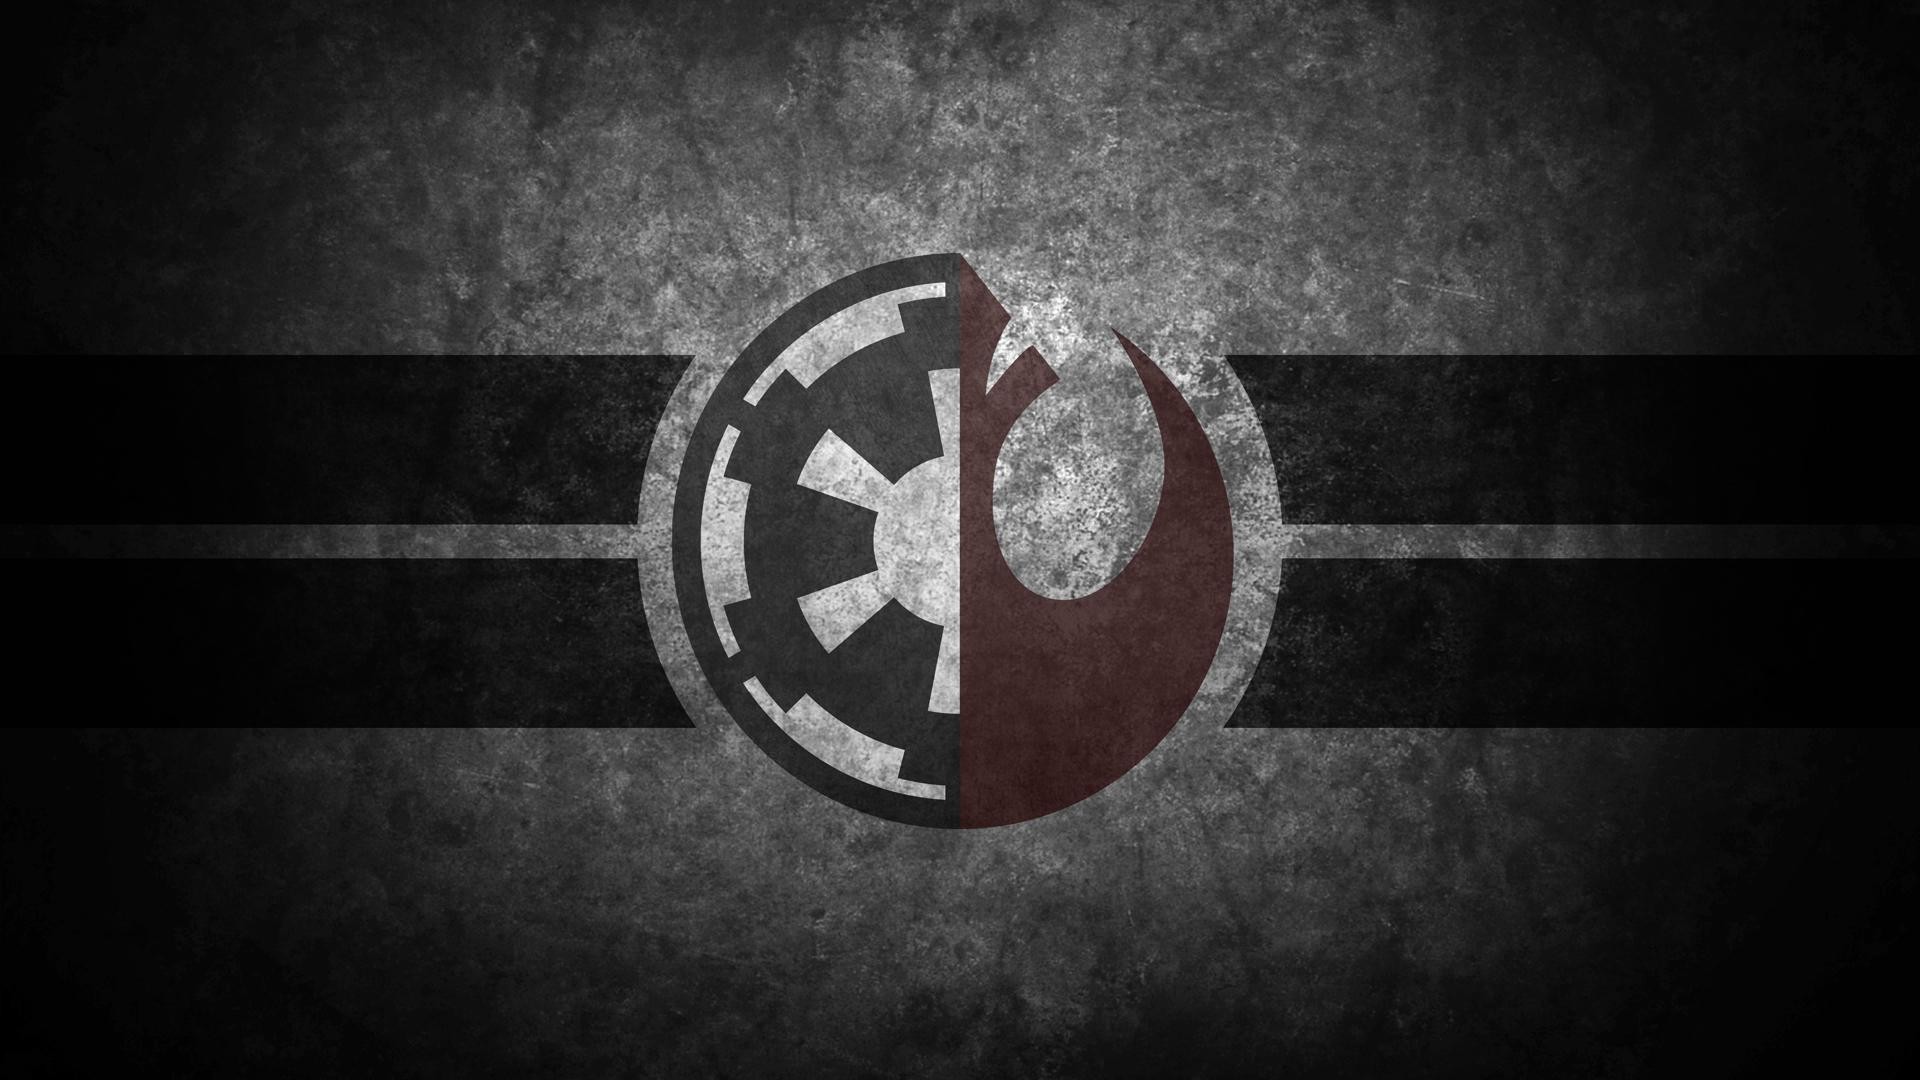 Best star wars logo wallpapers free images